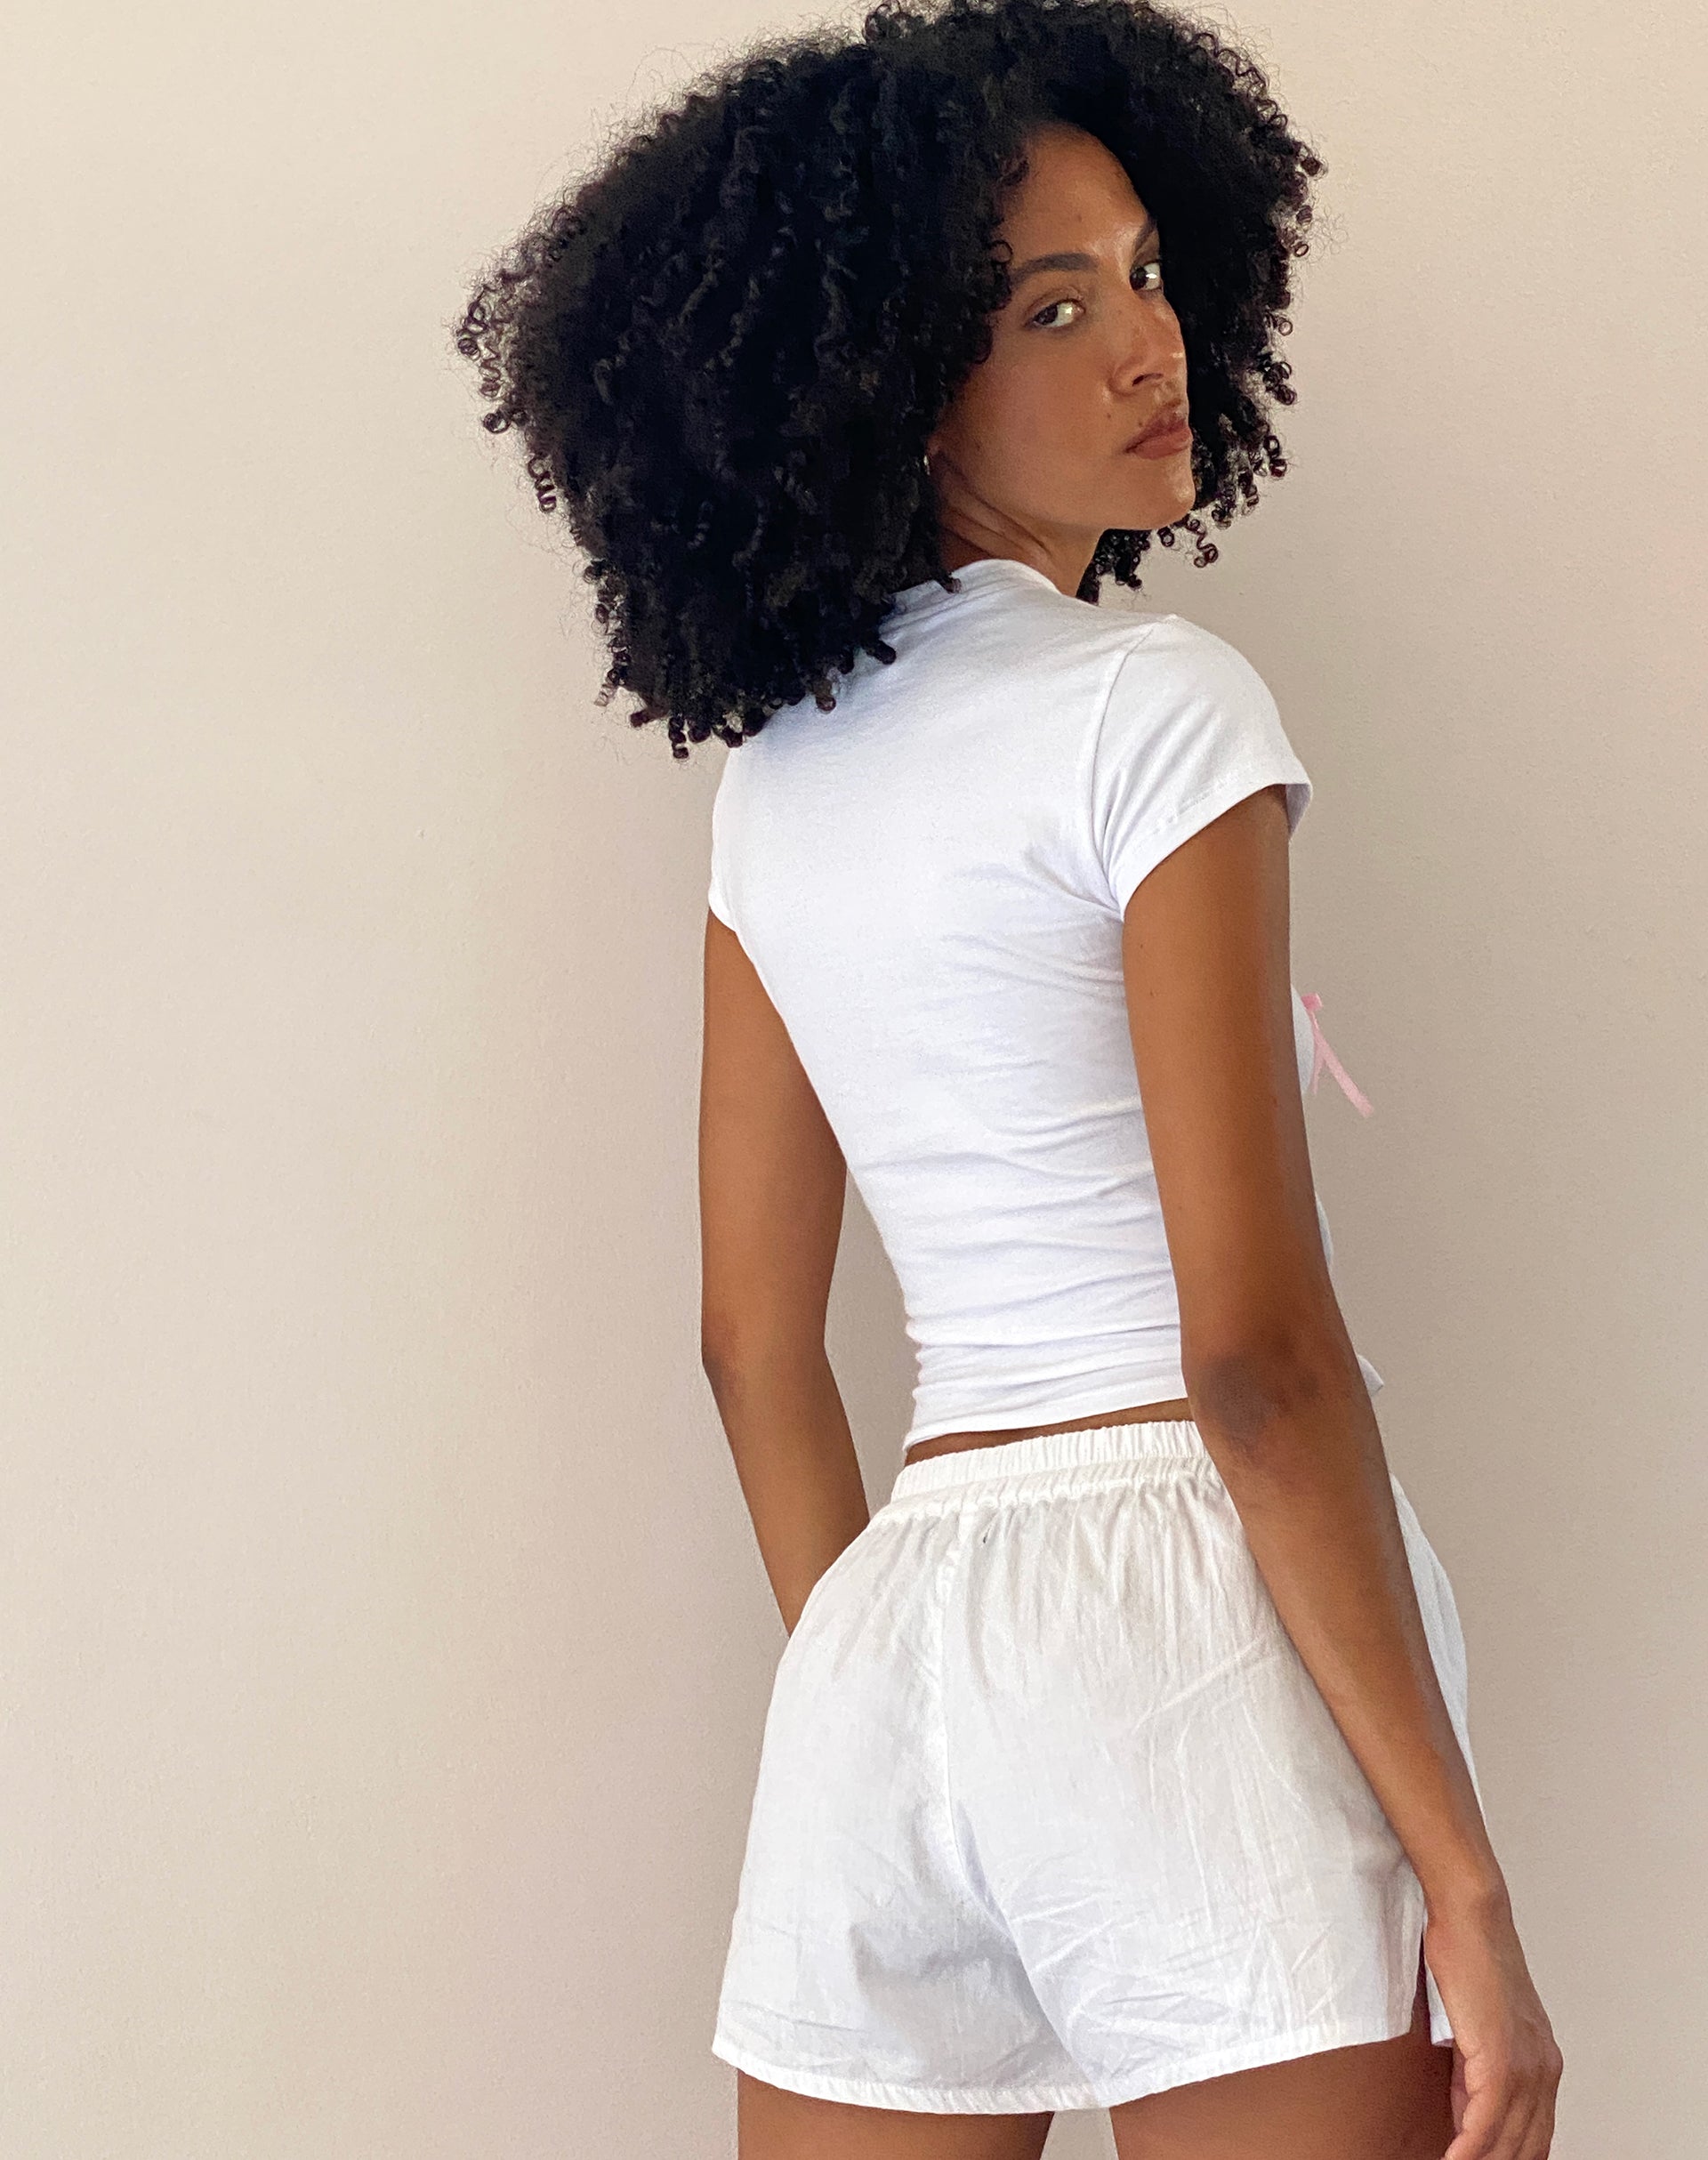 Image of Tiona Cropped Tee in White with Love Bunny Print and Embroidery